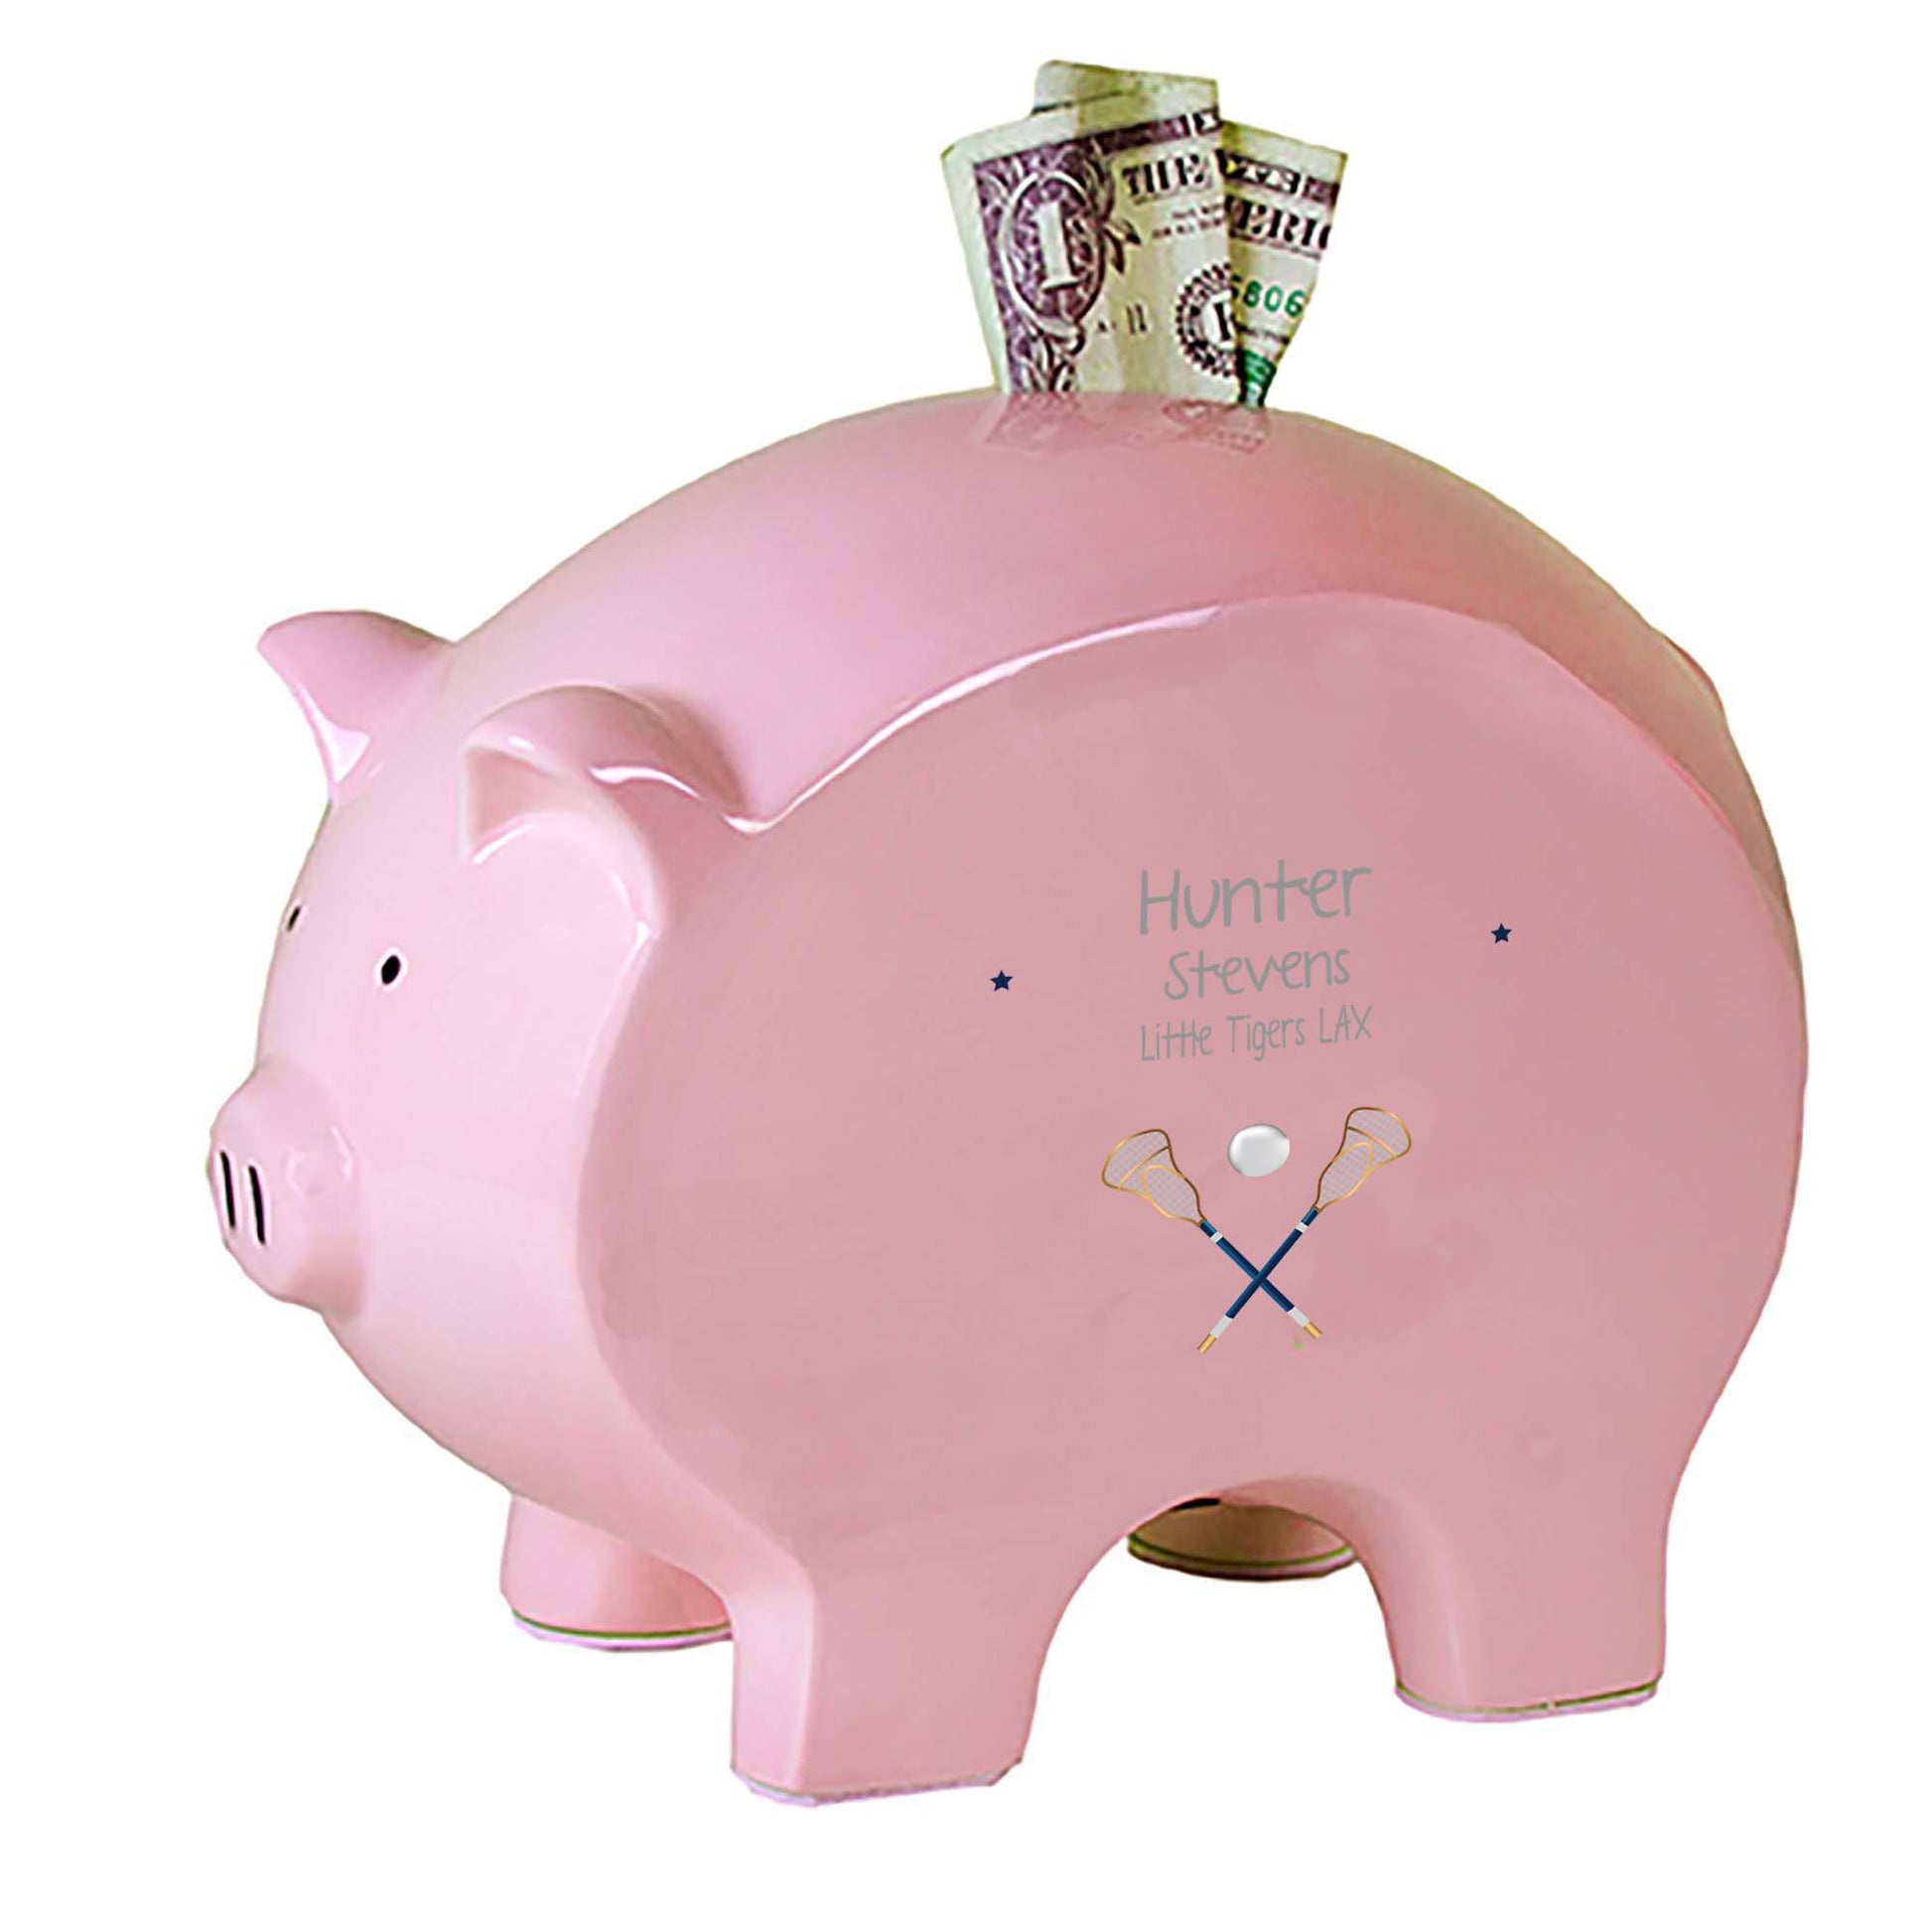 Personalized Pink Piggy Bank with Lacrosse Sticks design